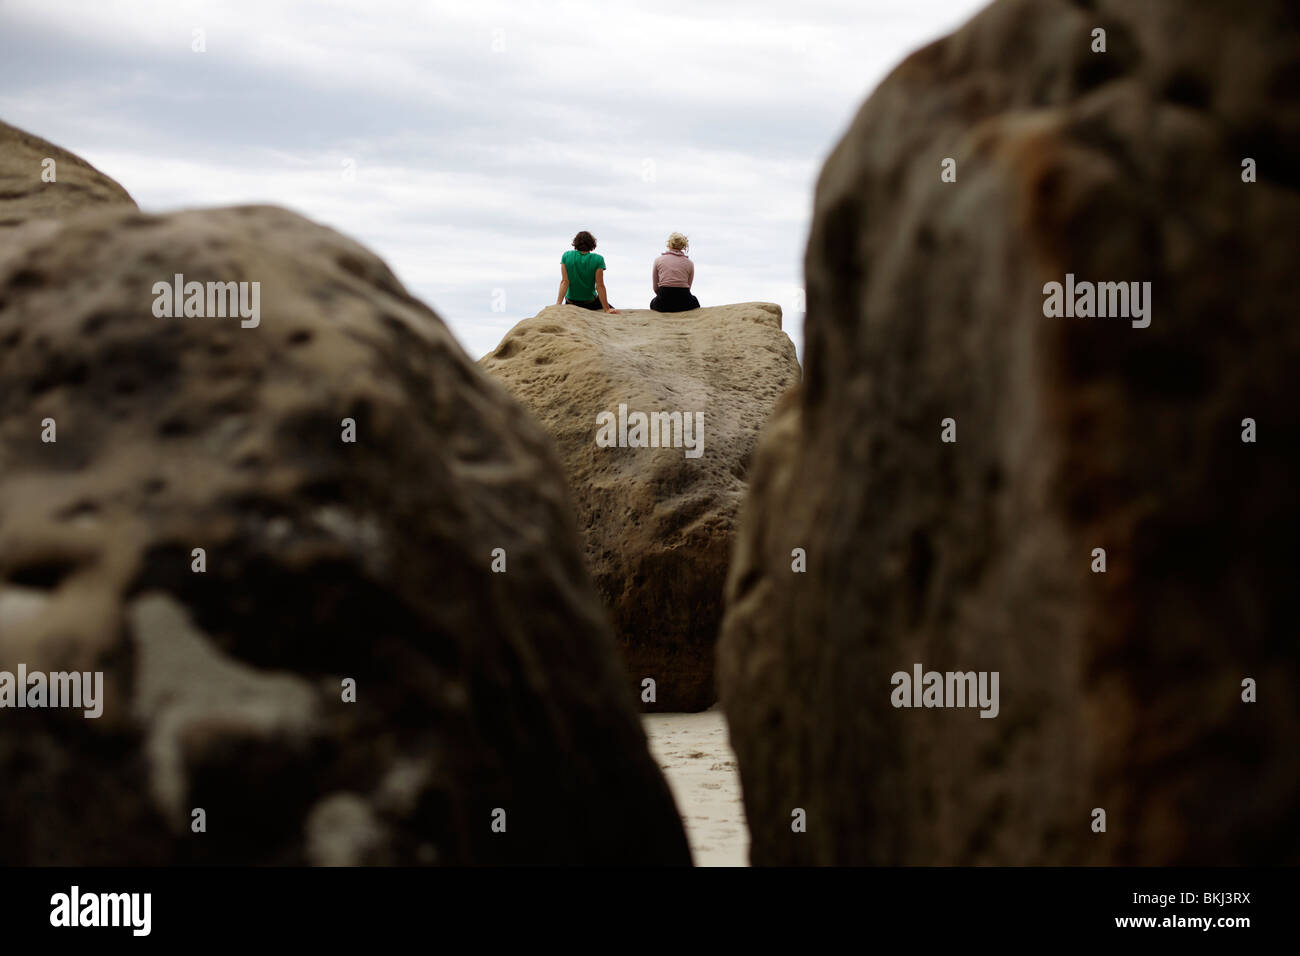 Two people sit on a rock at Tunnel Beach near Dunedin in New Zealand Stock Photo